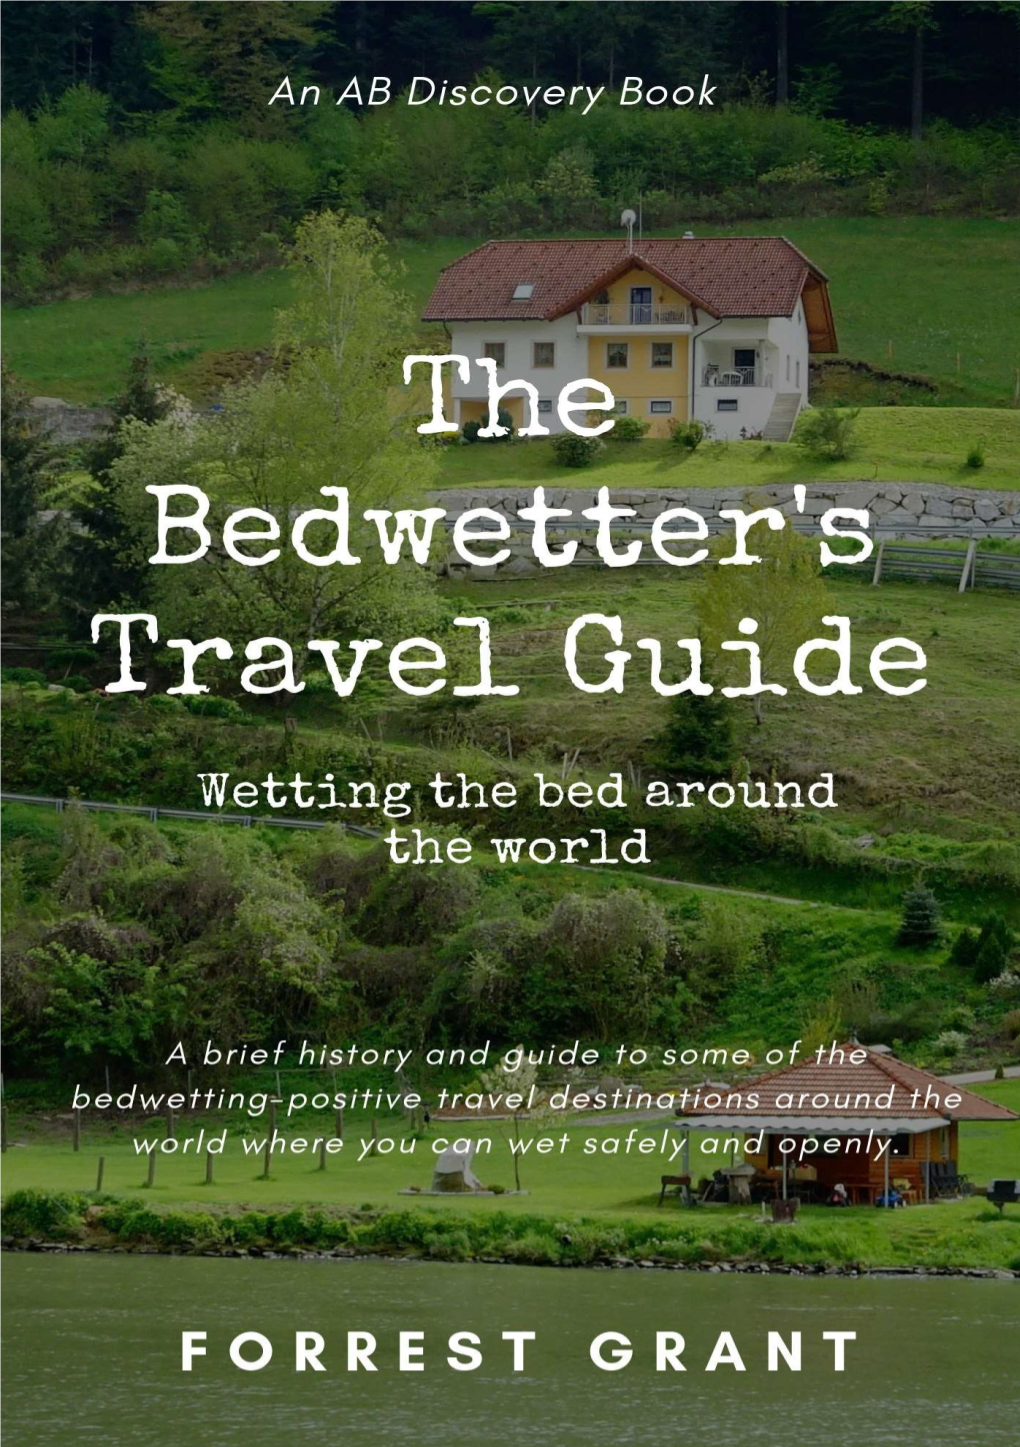 The-Bedwetters-Travel-Guide-Sample-1